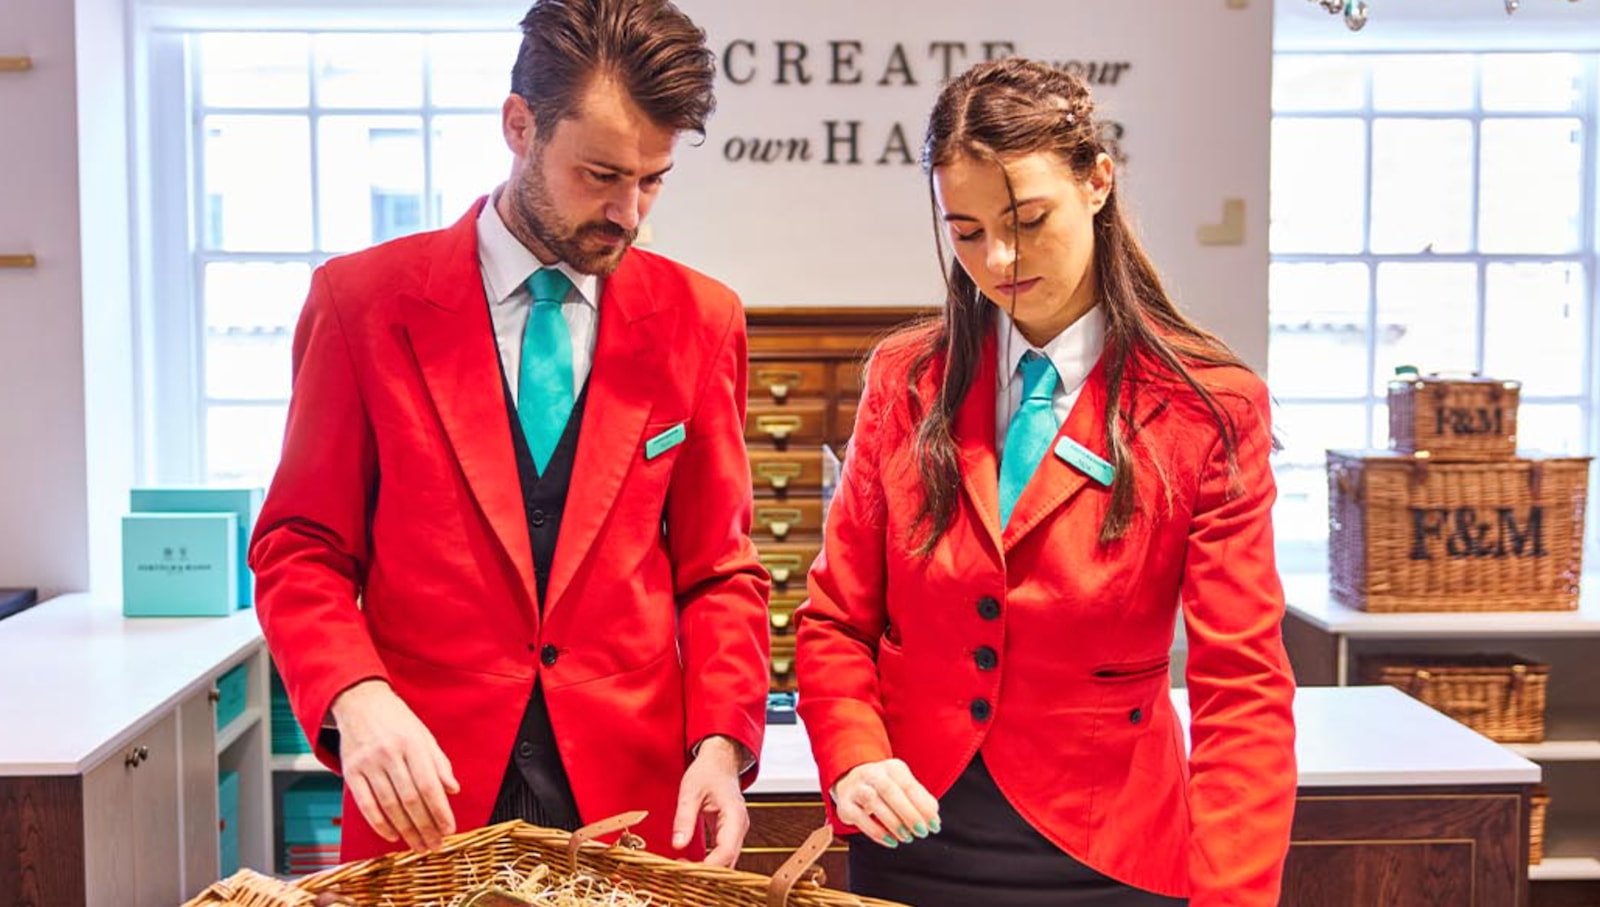 An experiential food hub is opening at Fortnum & Mason